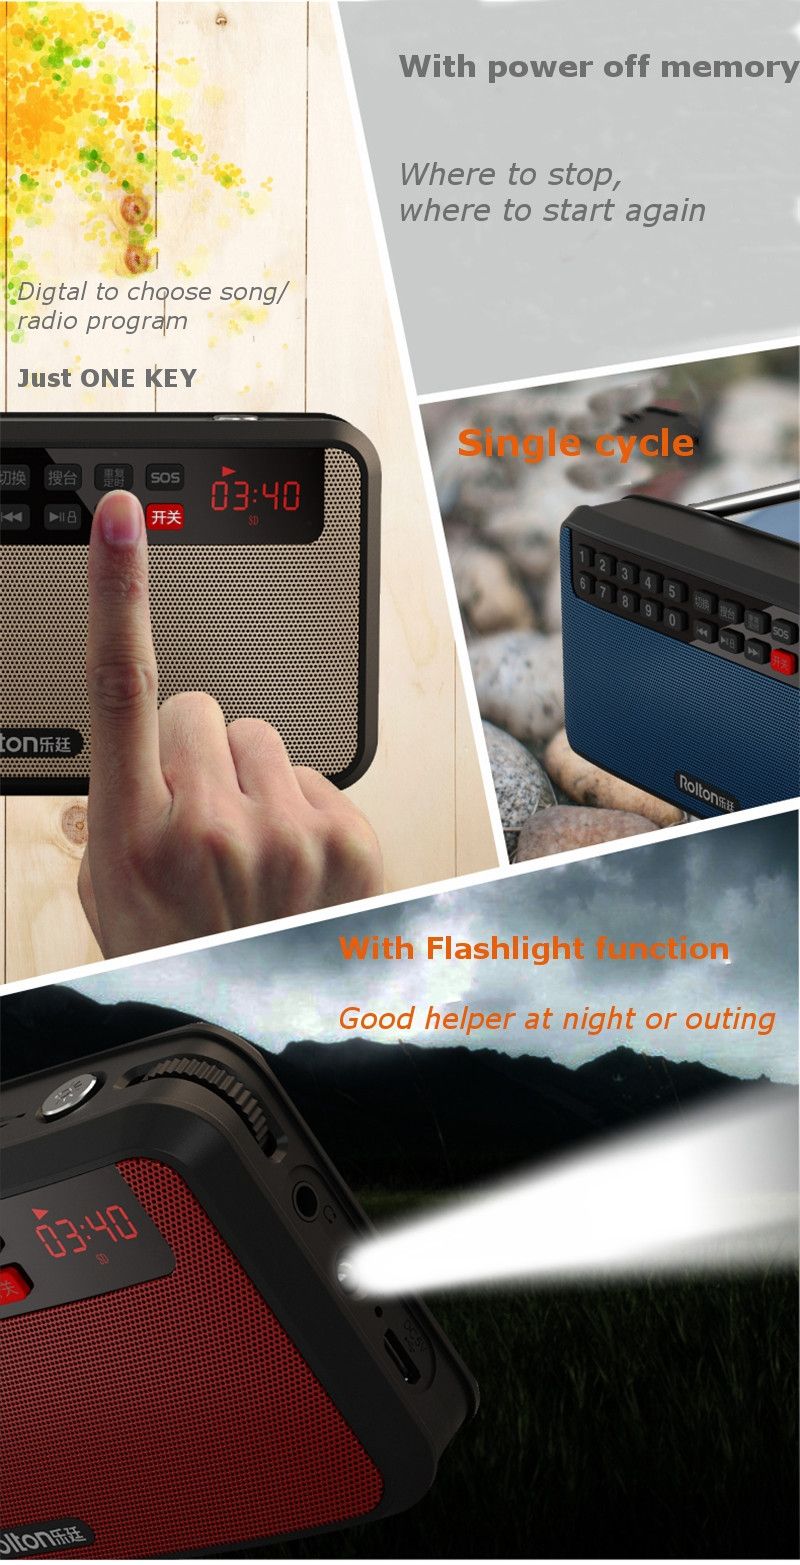 Rolton-T60-Portable-MP3-Stereo-Player-Audio-Speakers-FM-Radio-With-LED-Screen-Support-Tf-Card-Play-1130642